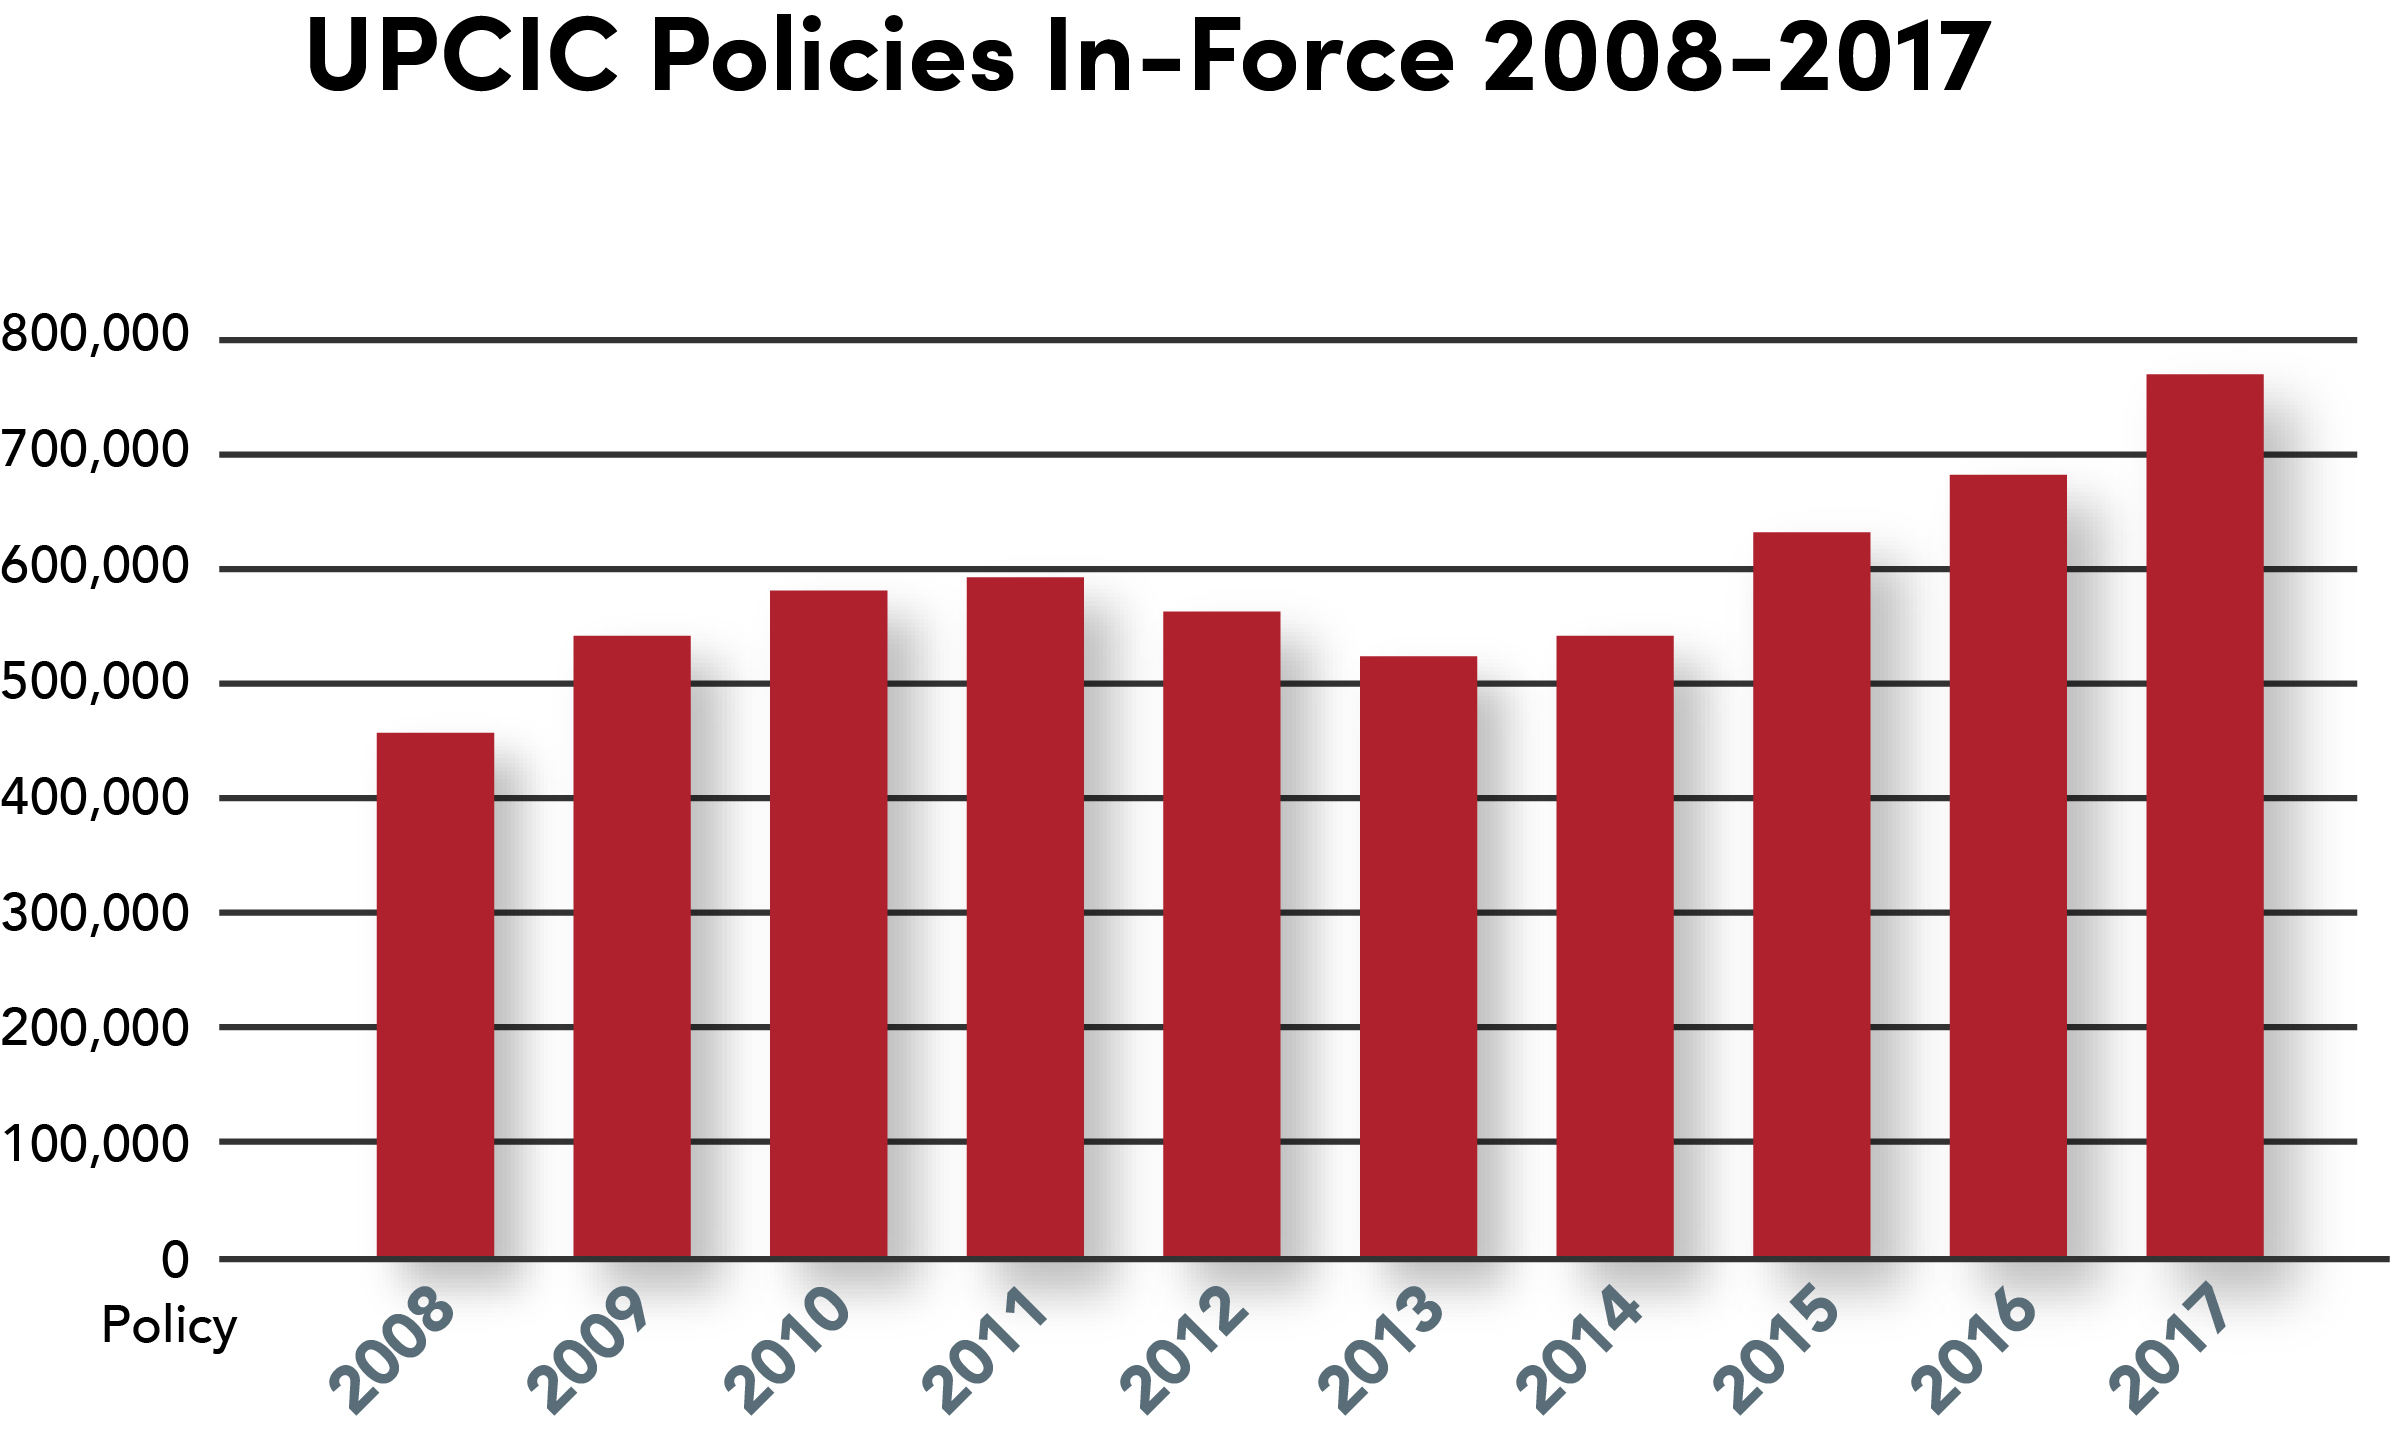 A graph of UPCIC policies in-force